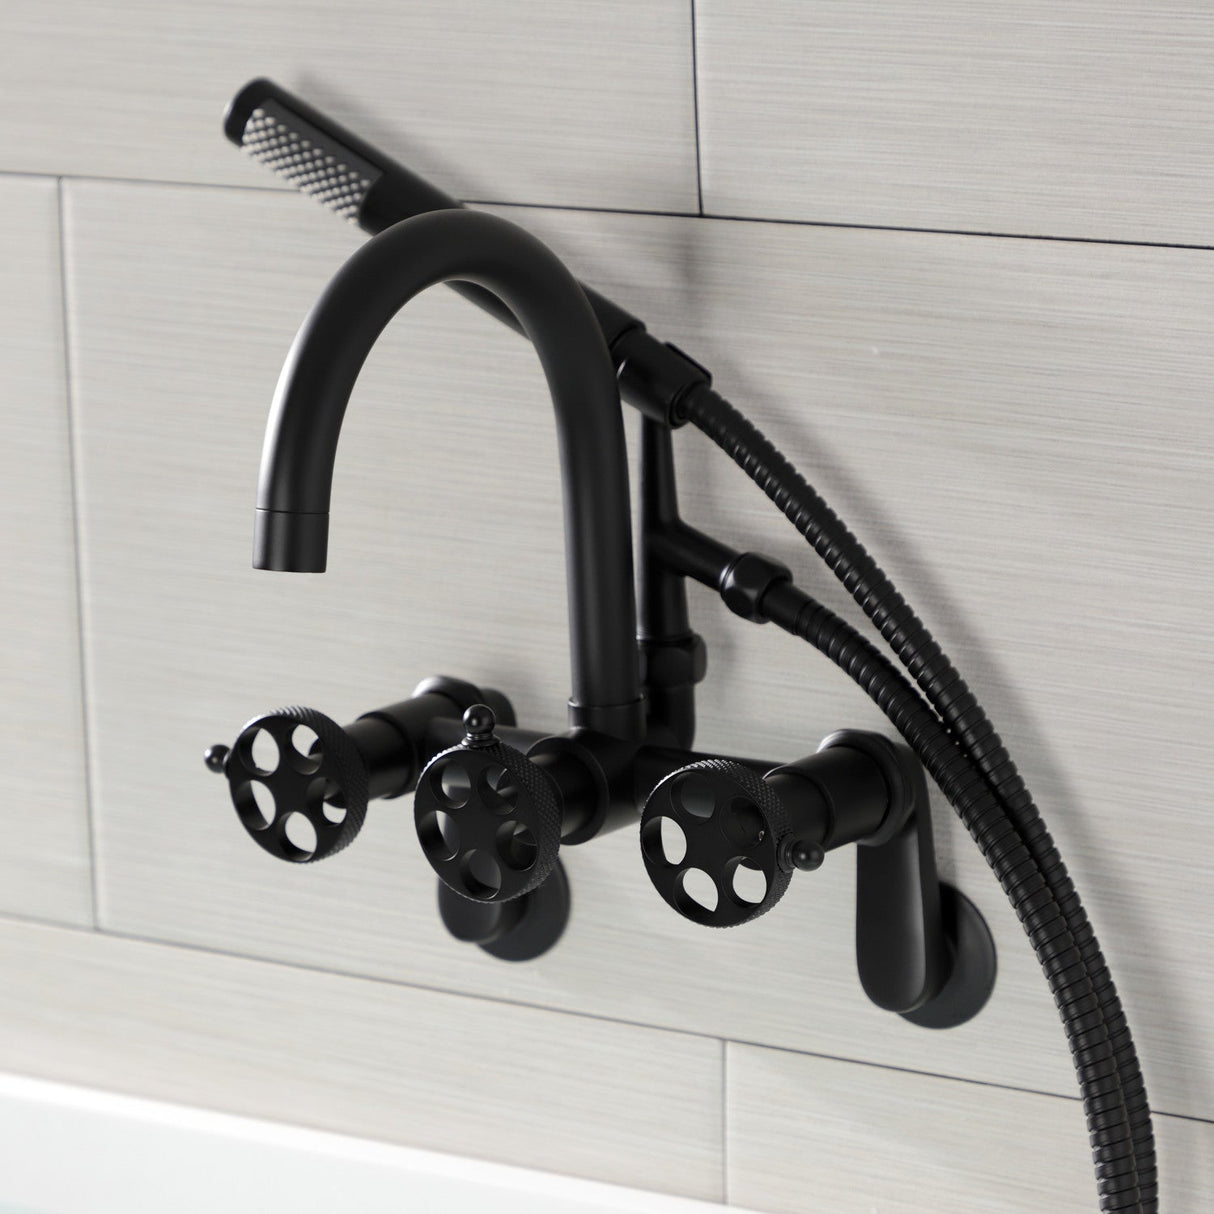 Webb AE8150RKX Three-Handle 2-Hole Adjustable Wall Mount Clawfoot Tub Faucet with Knurled Handle and Hand Shower, Matte Black